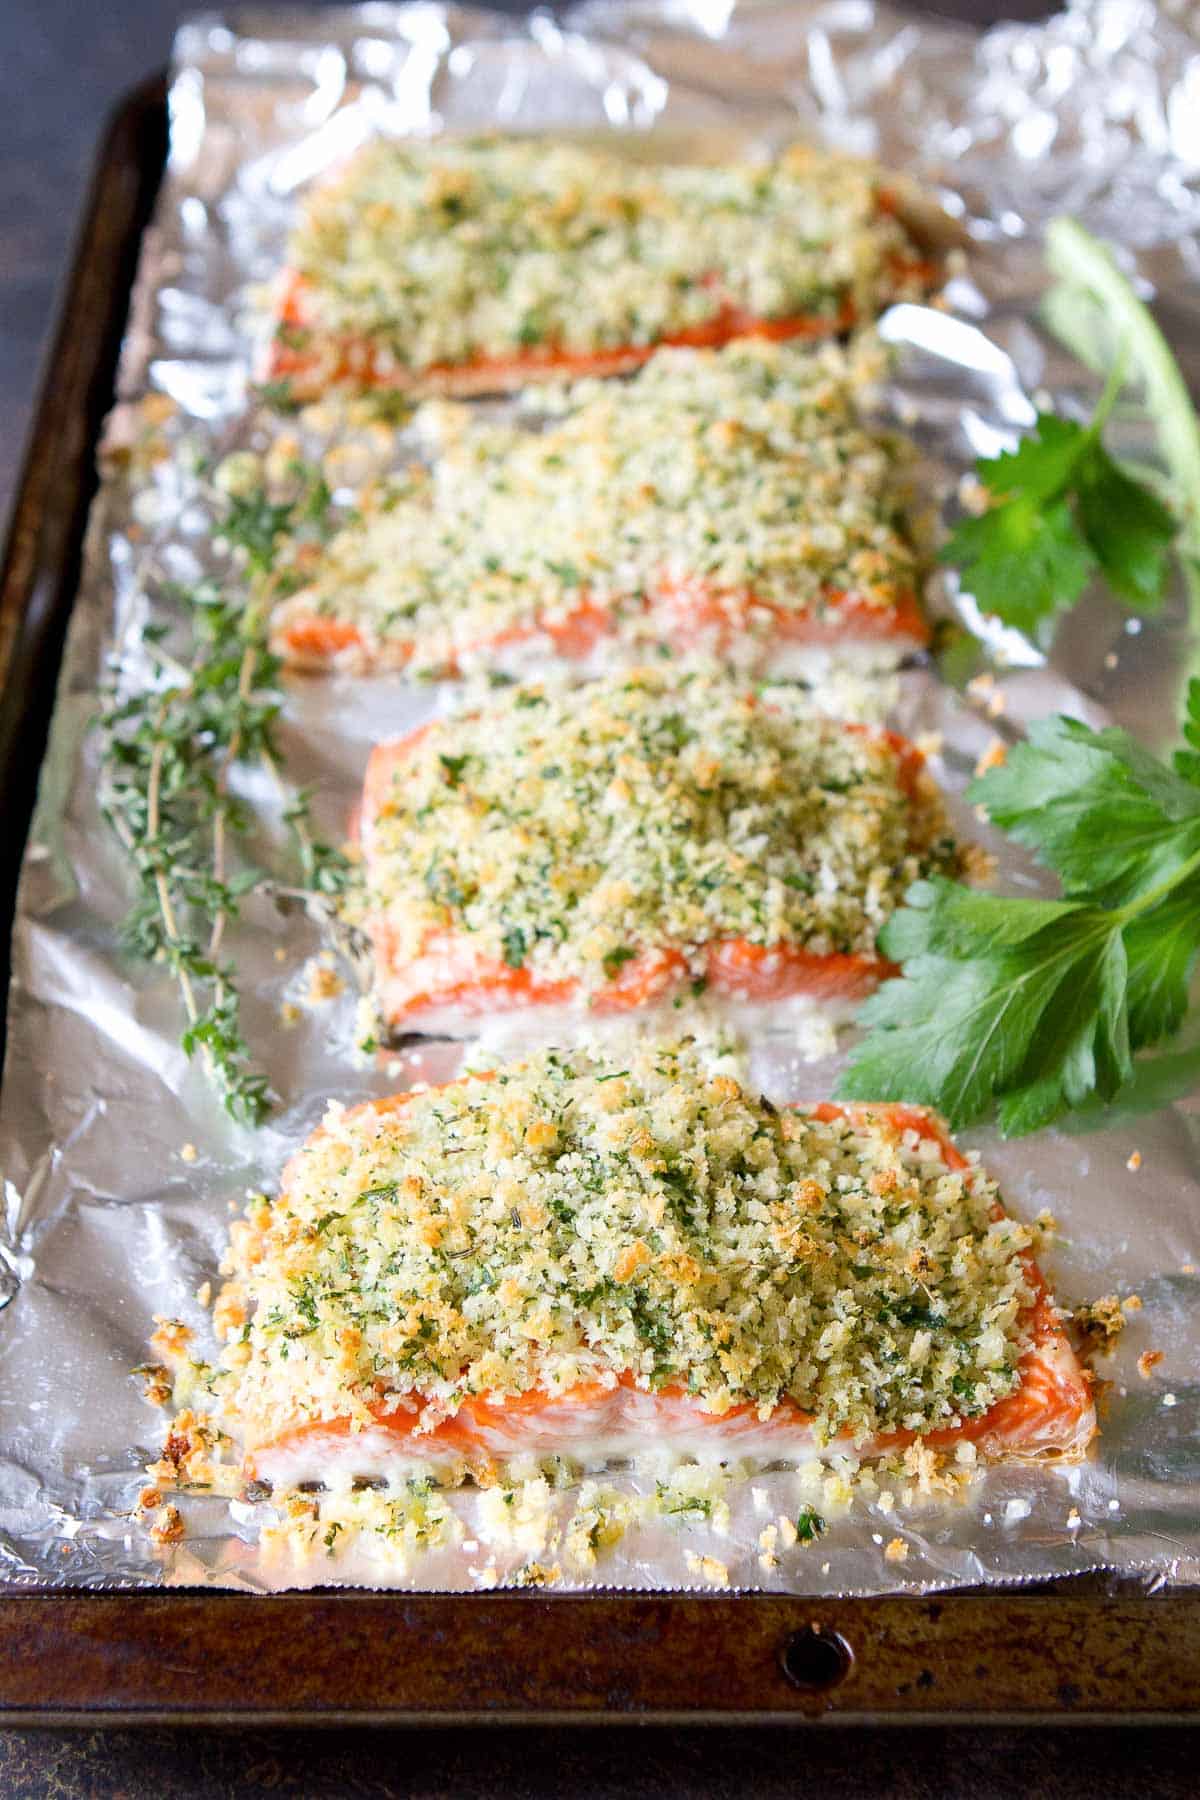 Parmesan Crusted Salmon is one of the easiest weeknight meals you can throw together! Serve it up with a side of rice and some steamed veggies or a salad. | Oven Baked | Recipes | Easy | Quick | Dinner